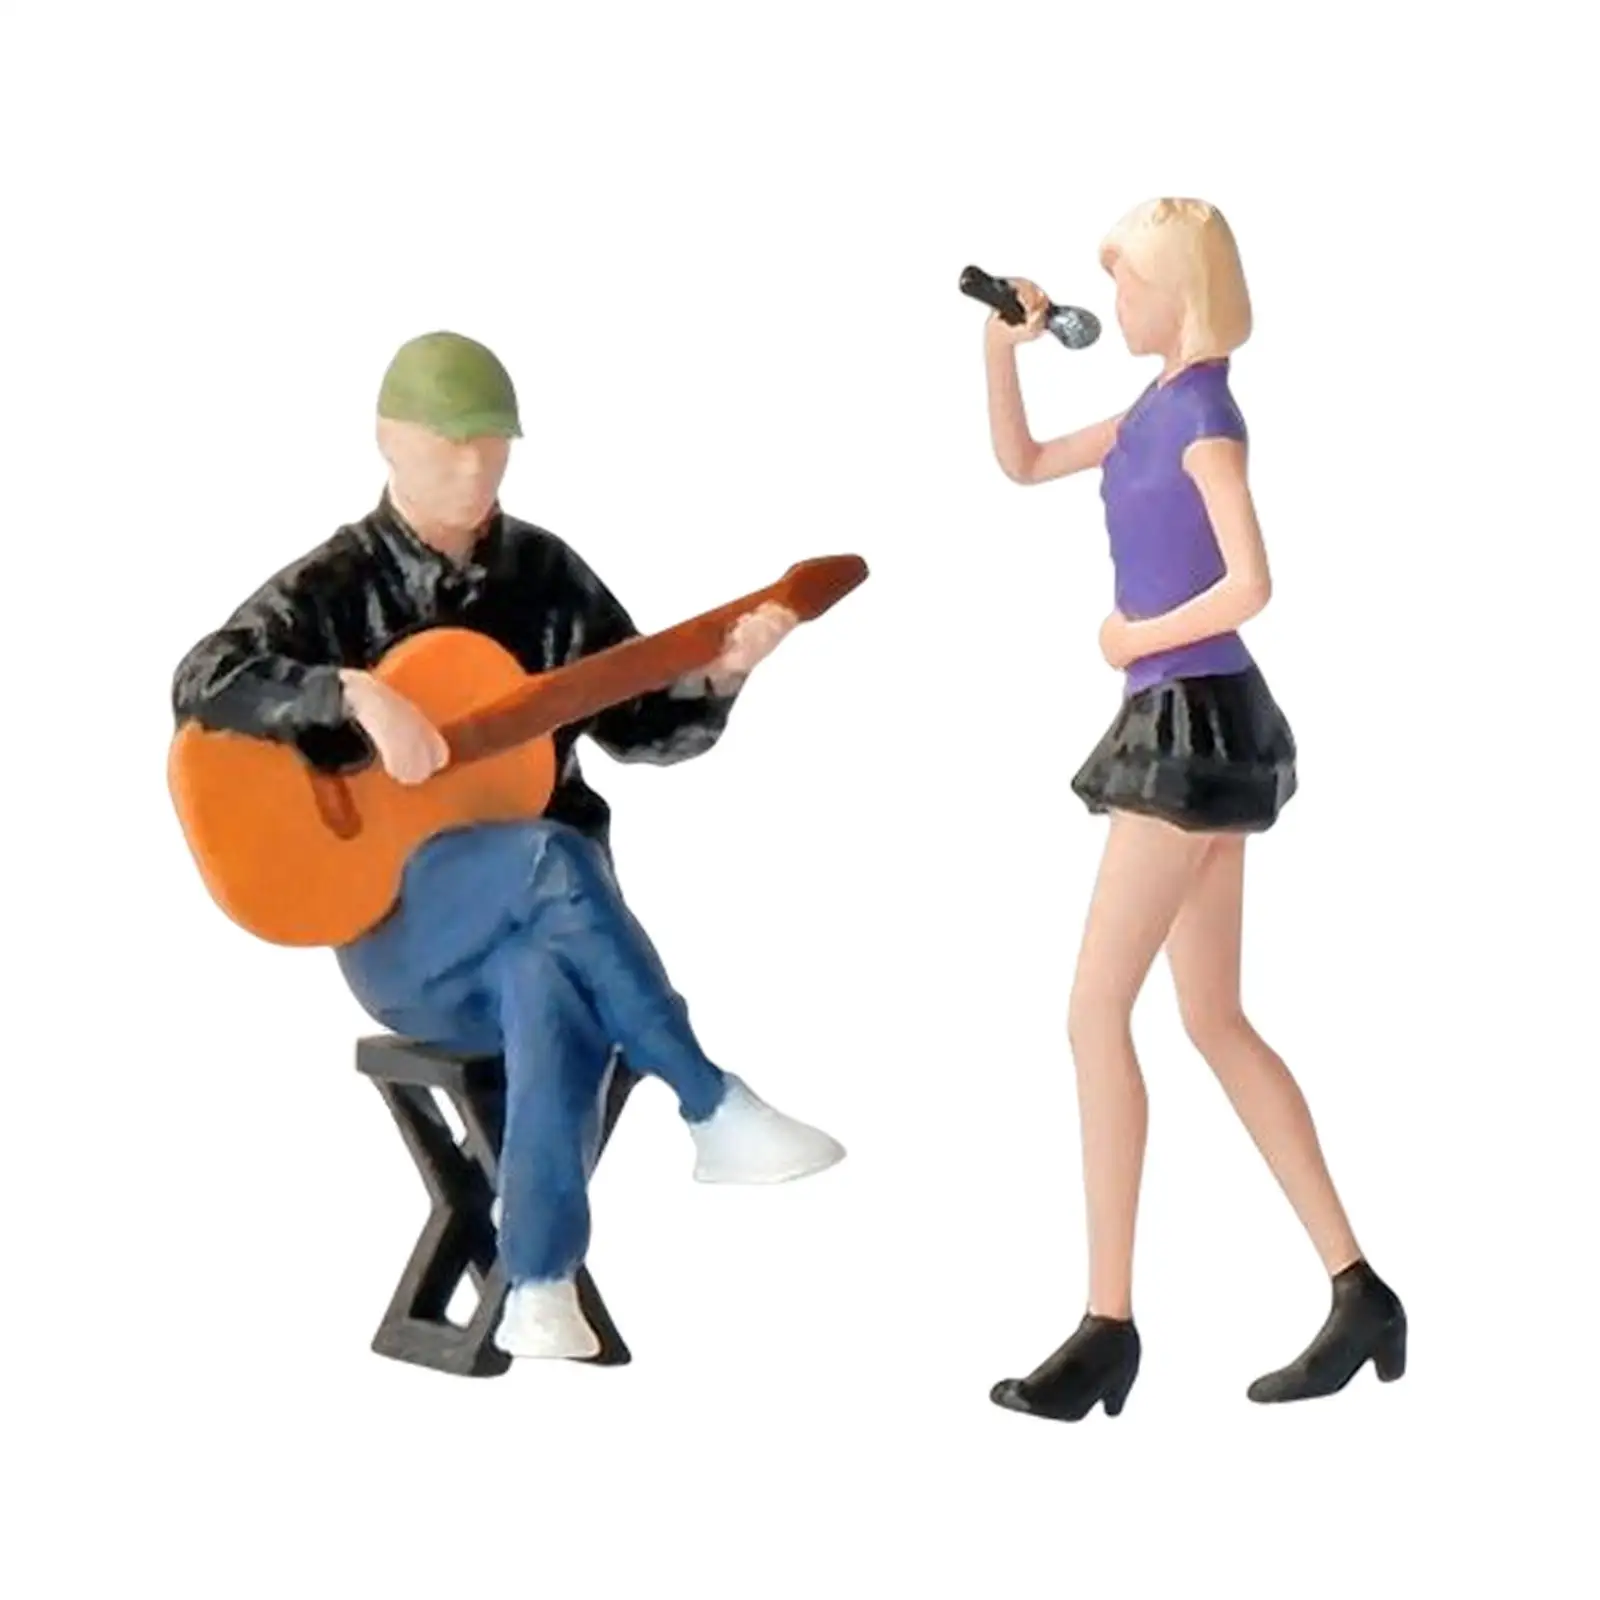 Guitarist and Singer Figures Model Trains People Figures Mini for Dollhouse